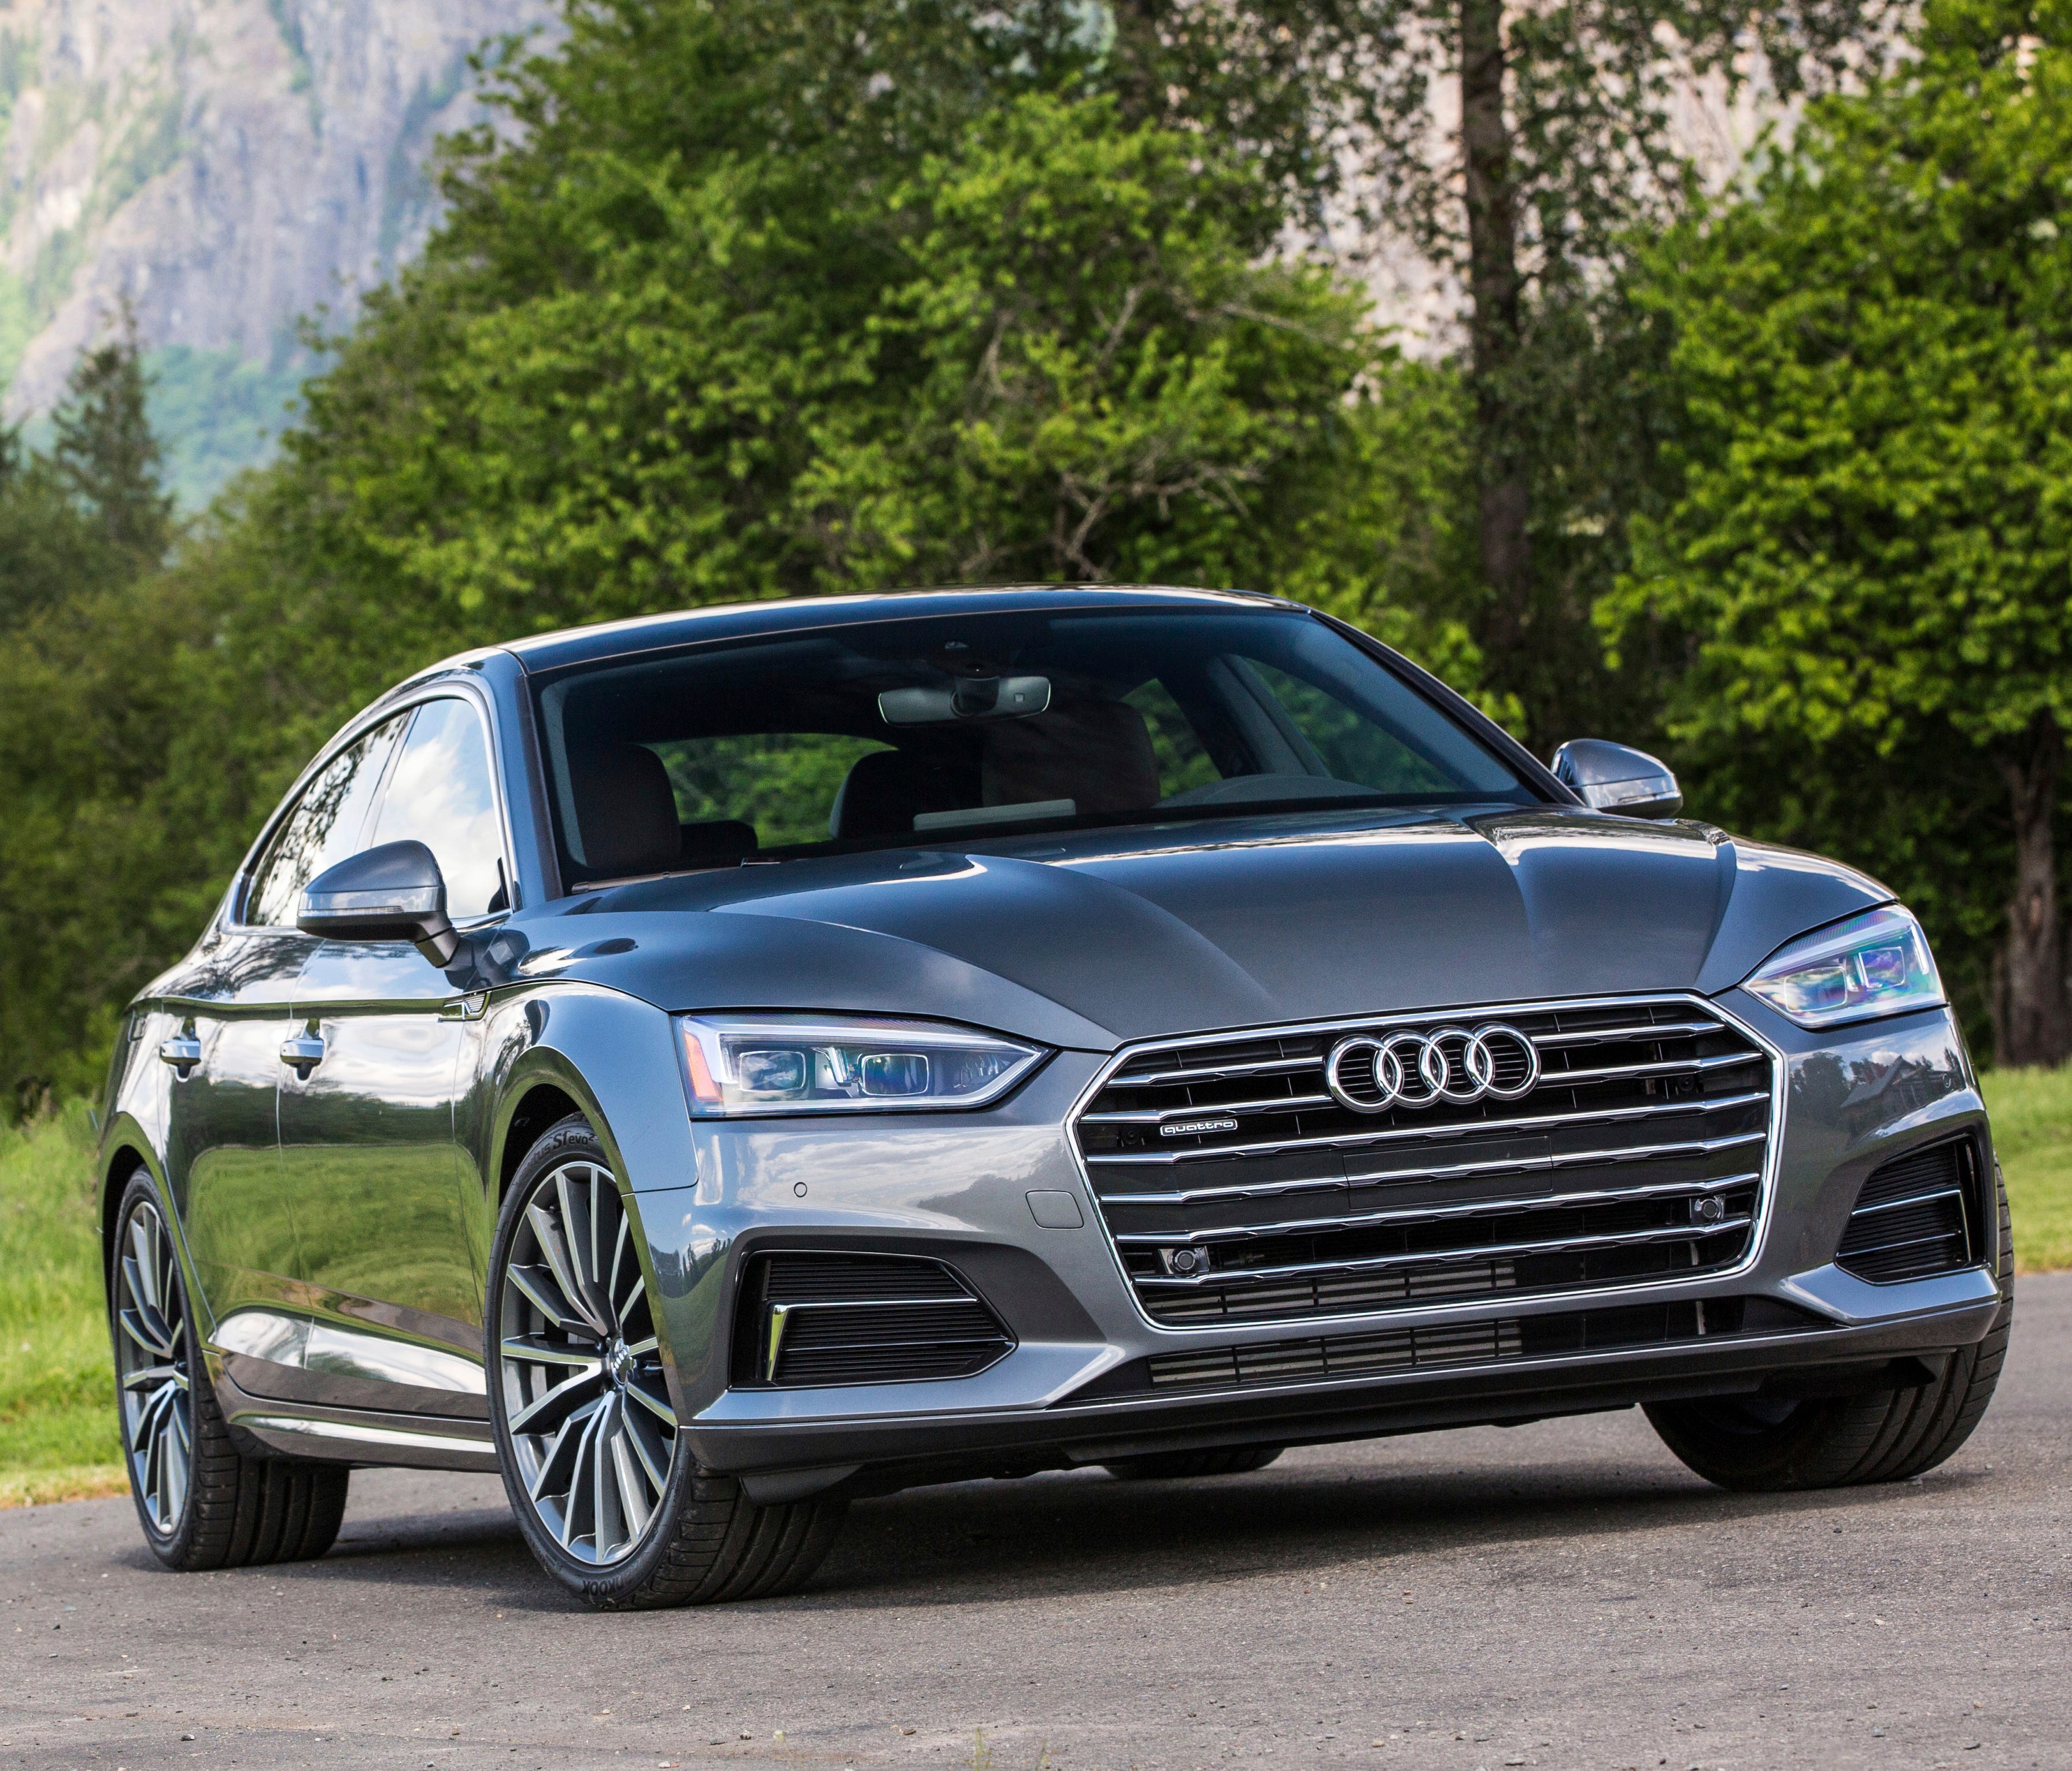 This photo provided by Audi shows the 2018 Audi A5 Sportback, the performance-oriented version of the company's A5 model. The A5 Sportback starts around $43,000, while the next-level S5 Sportback starts around $54,000. (Courtesy of Audi AG via AP)